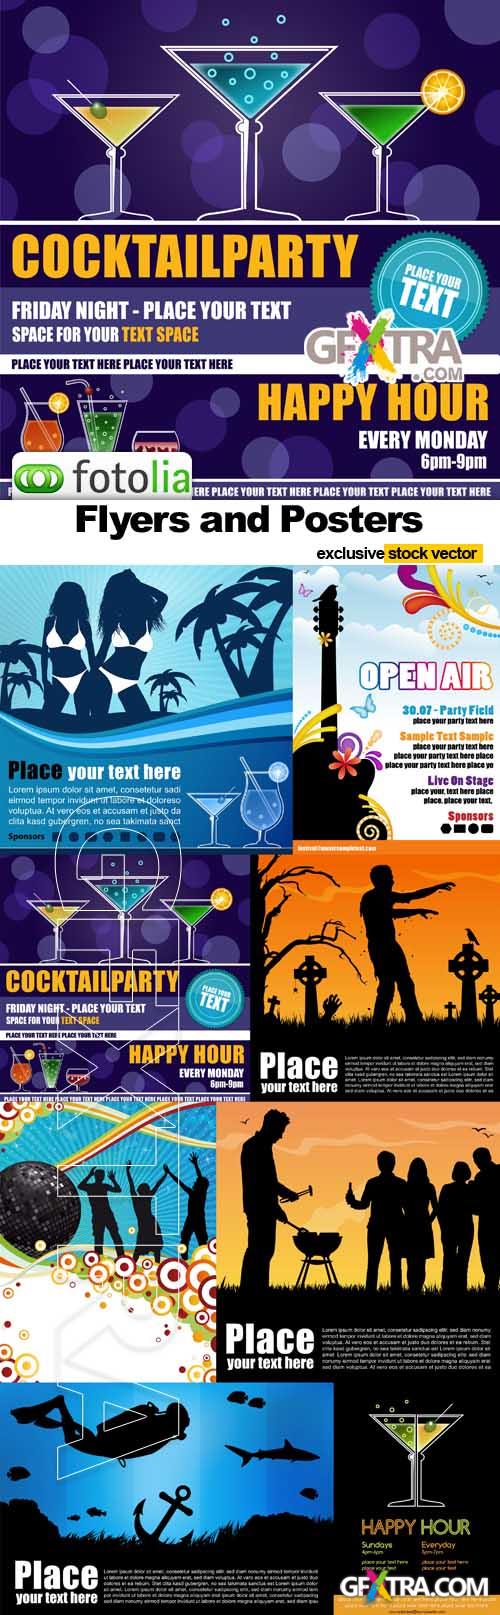 Flyers and Posters - Vector Stock